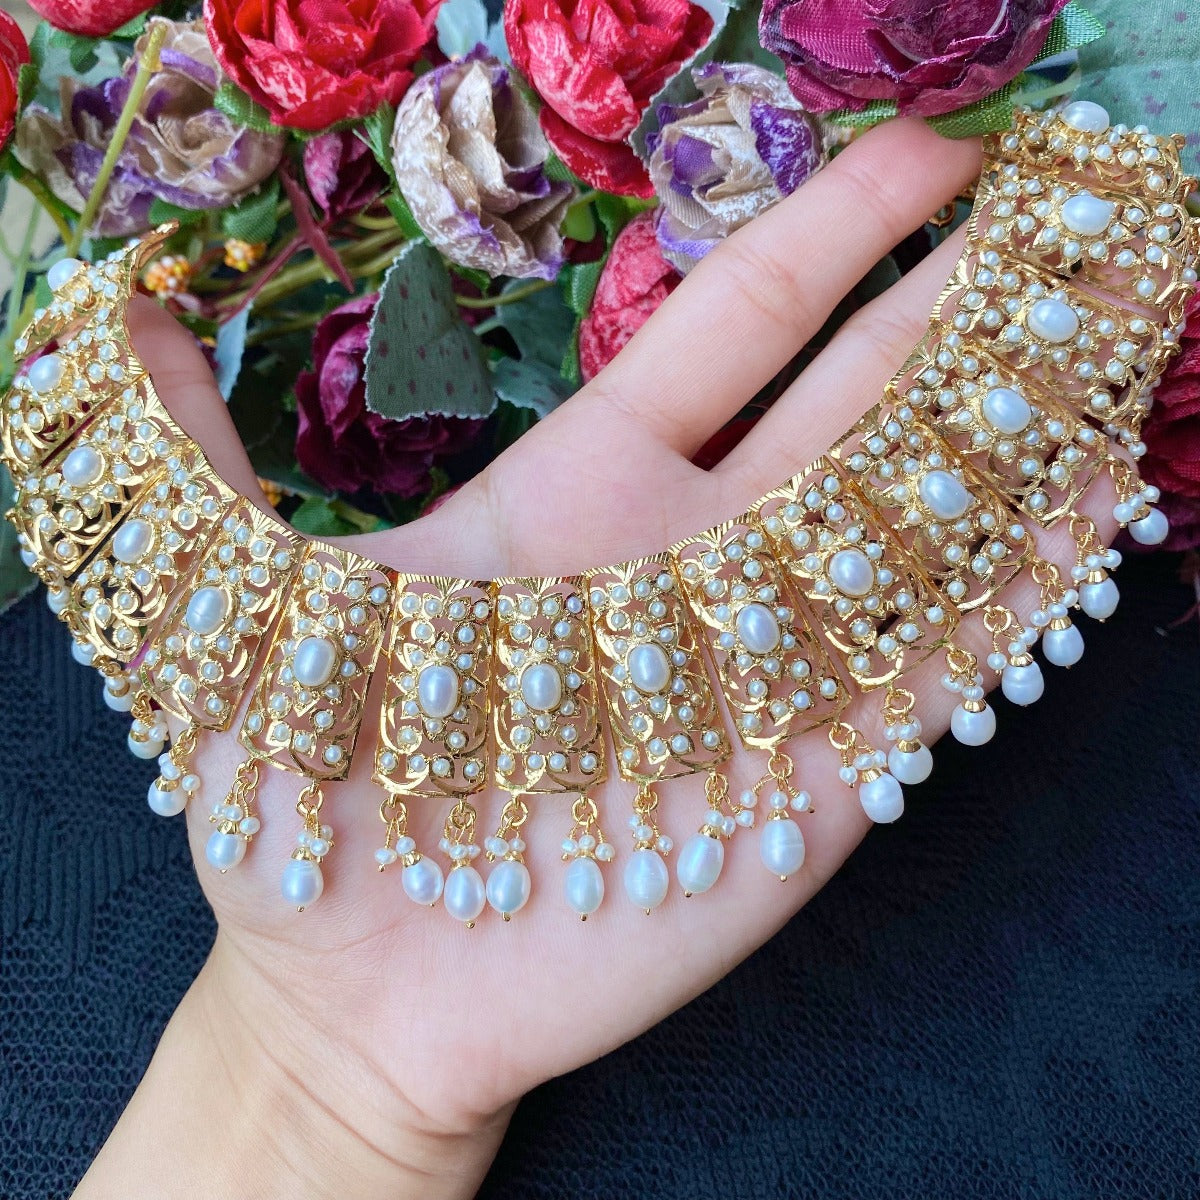 next to gold jewellery in pearls